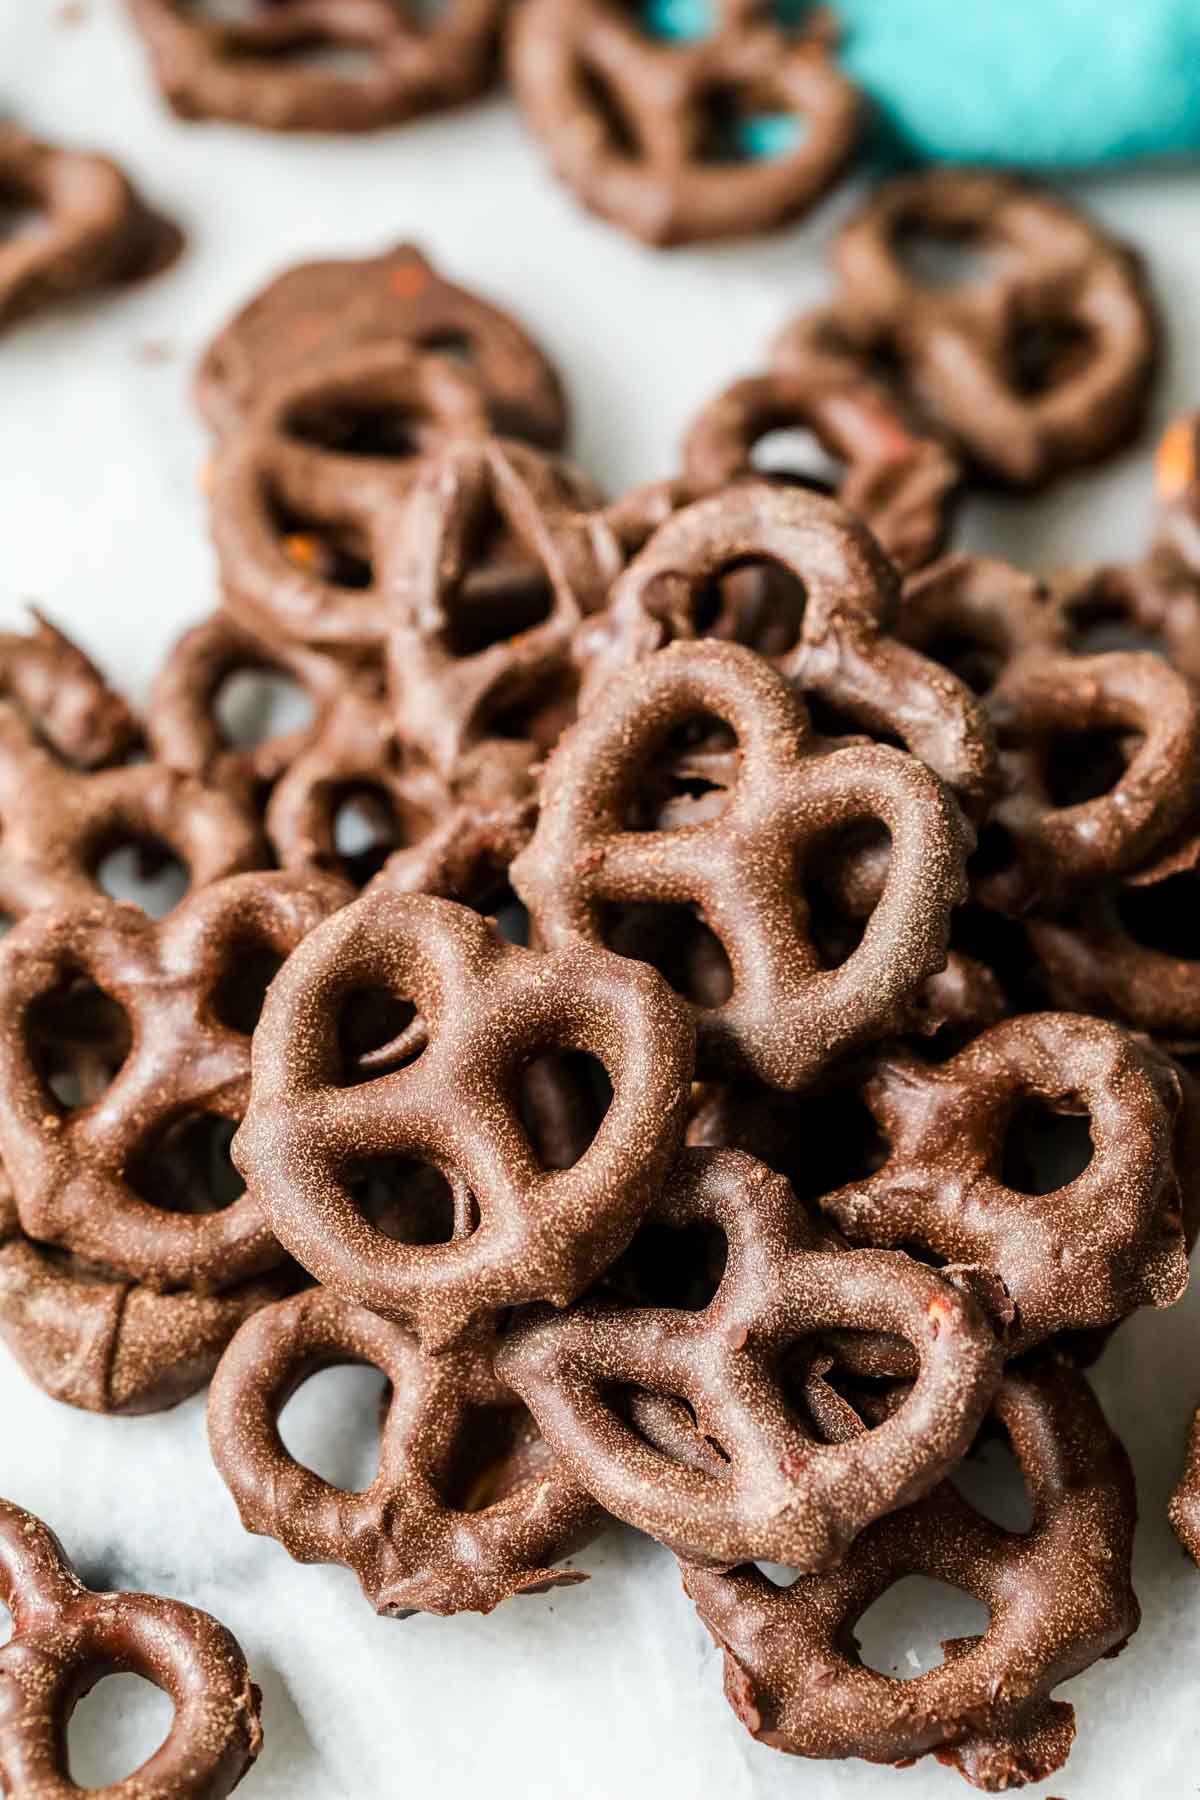 Close up view of chocolate dipped pretzels with a dull finish because the chocolate was not tempered.